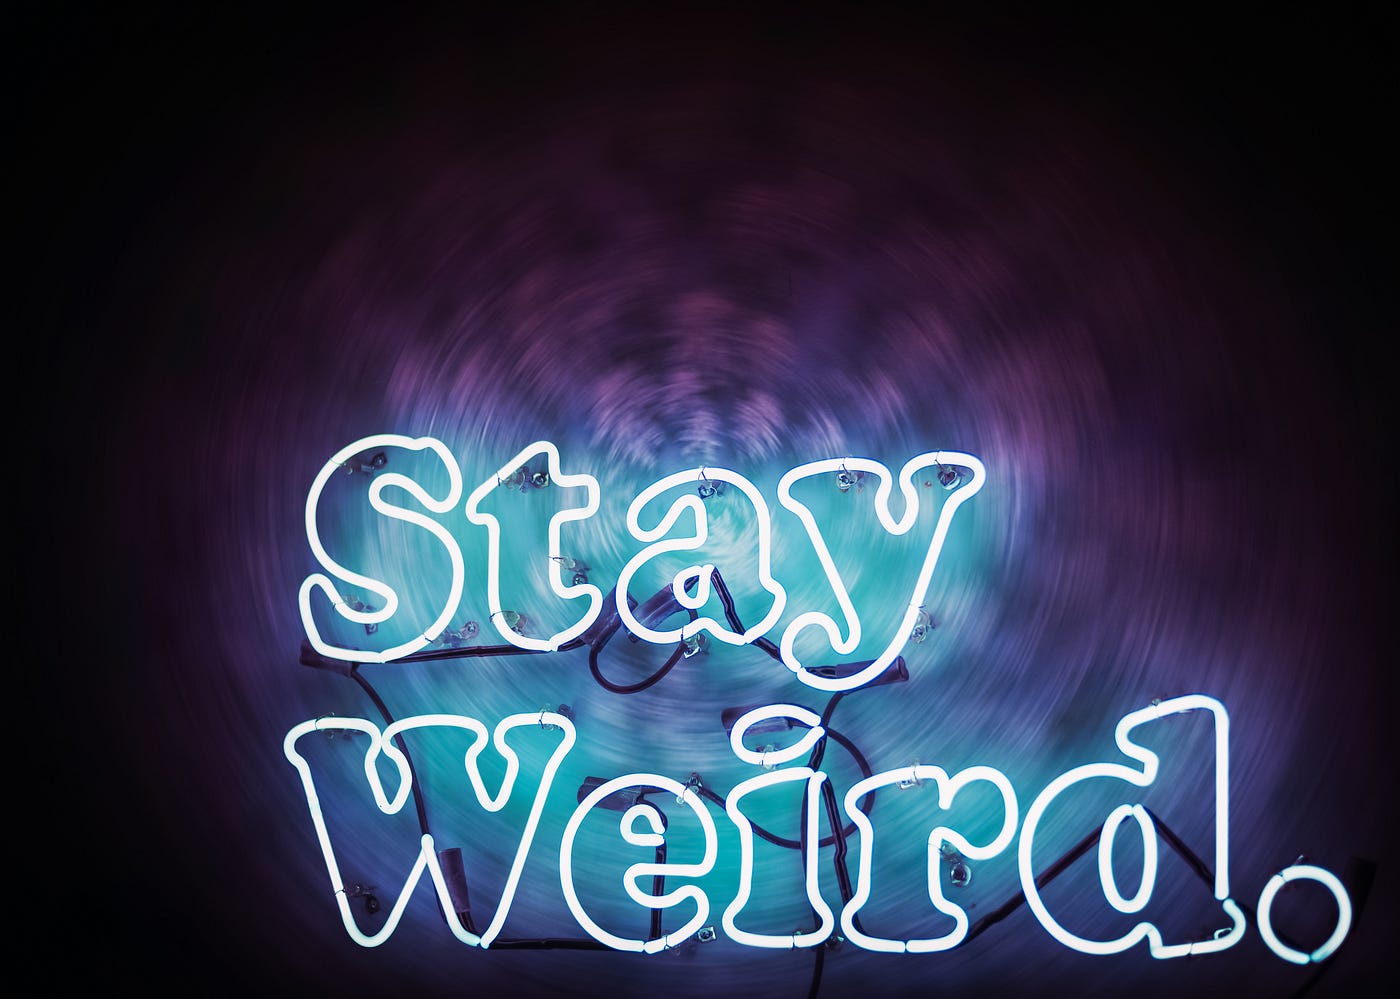 Dark purple & violet background against which the words “stay weird” are contrasted in white-outlined turquoise-blue lettering.